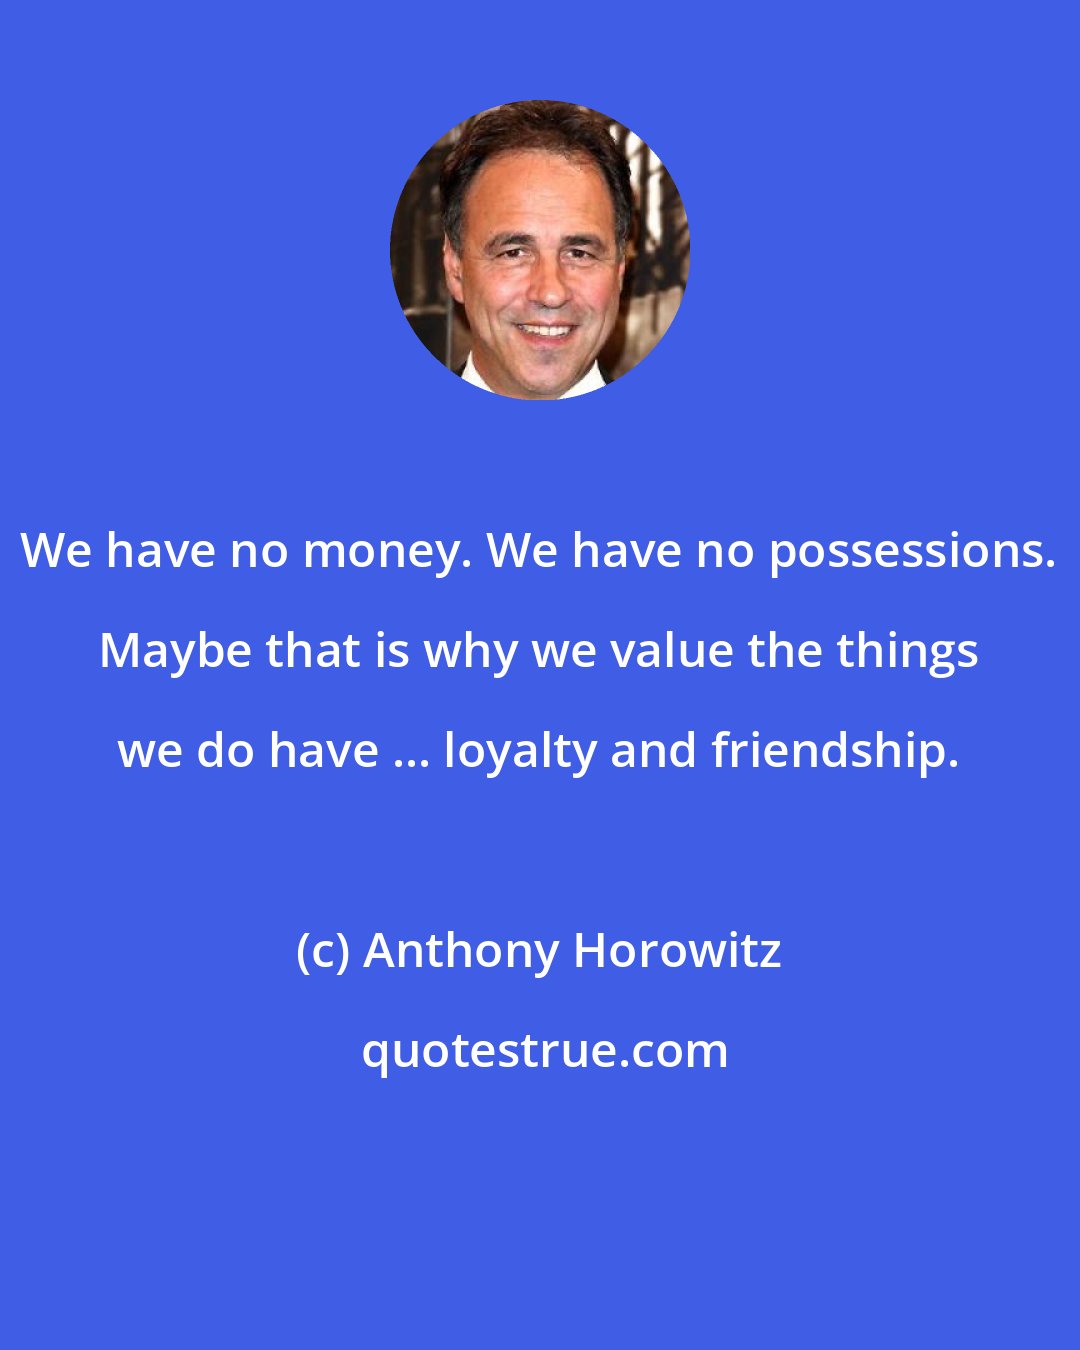 Anthony Horowitz: We have no money. We have no possessions. Maybe that is why we value the things we do have ... loyalty and friendship.